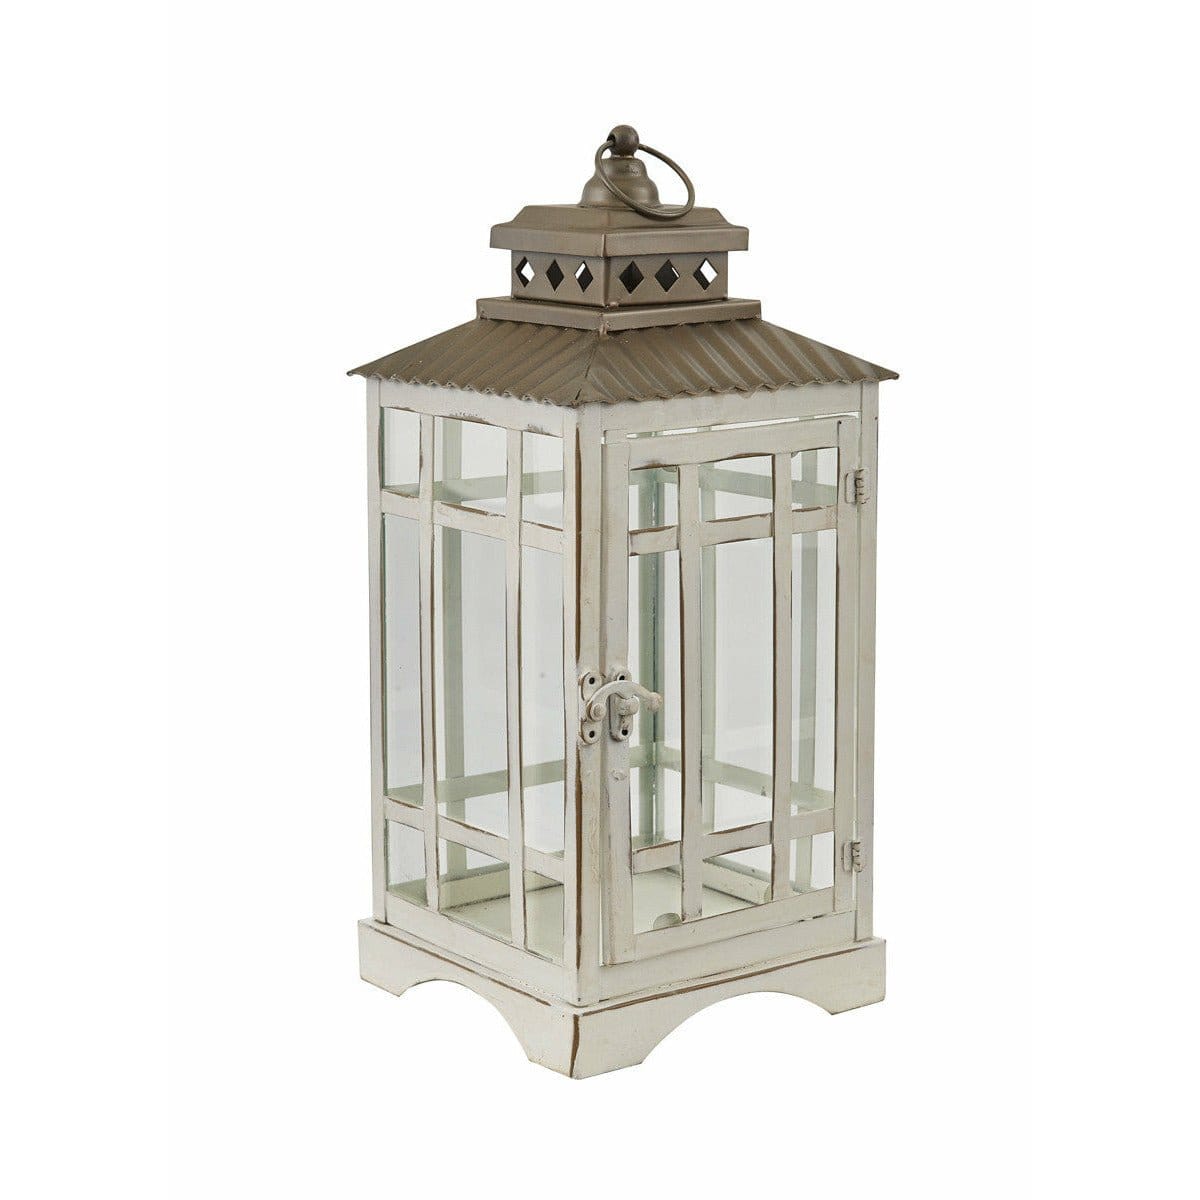 Distressed - Large White Lantern Candle Holder For Pillar Candles-Park Designs-The Village Merchant